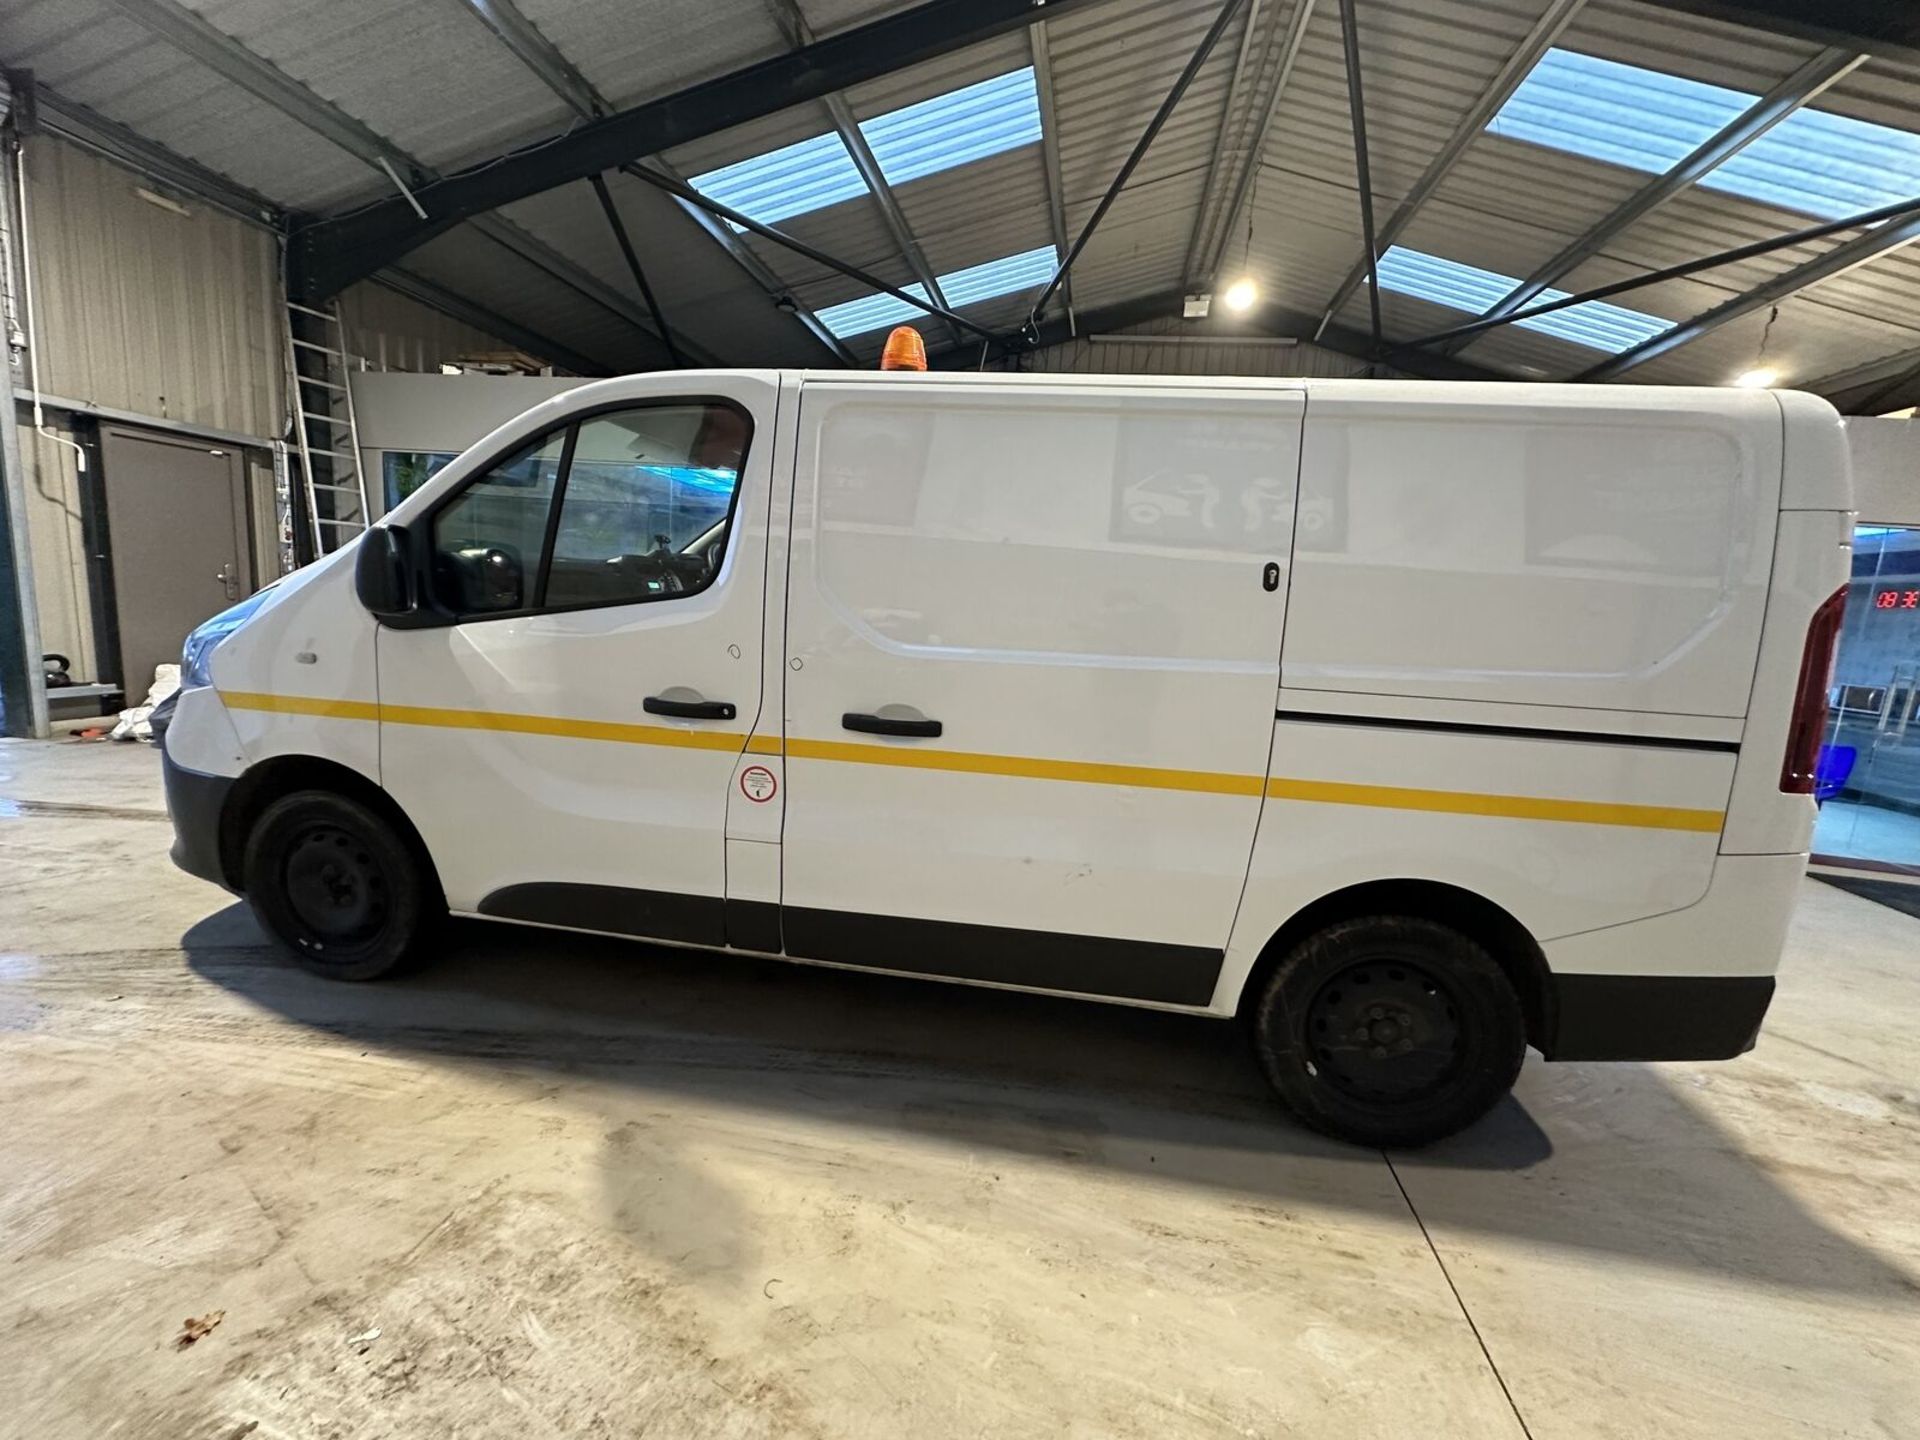 **(ONLY 52K MILEAGE)** PRIME CONDITION PICK: RENAULT TRAFIC SL28, CLEAN AND TIDY